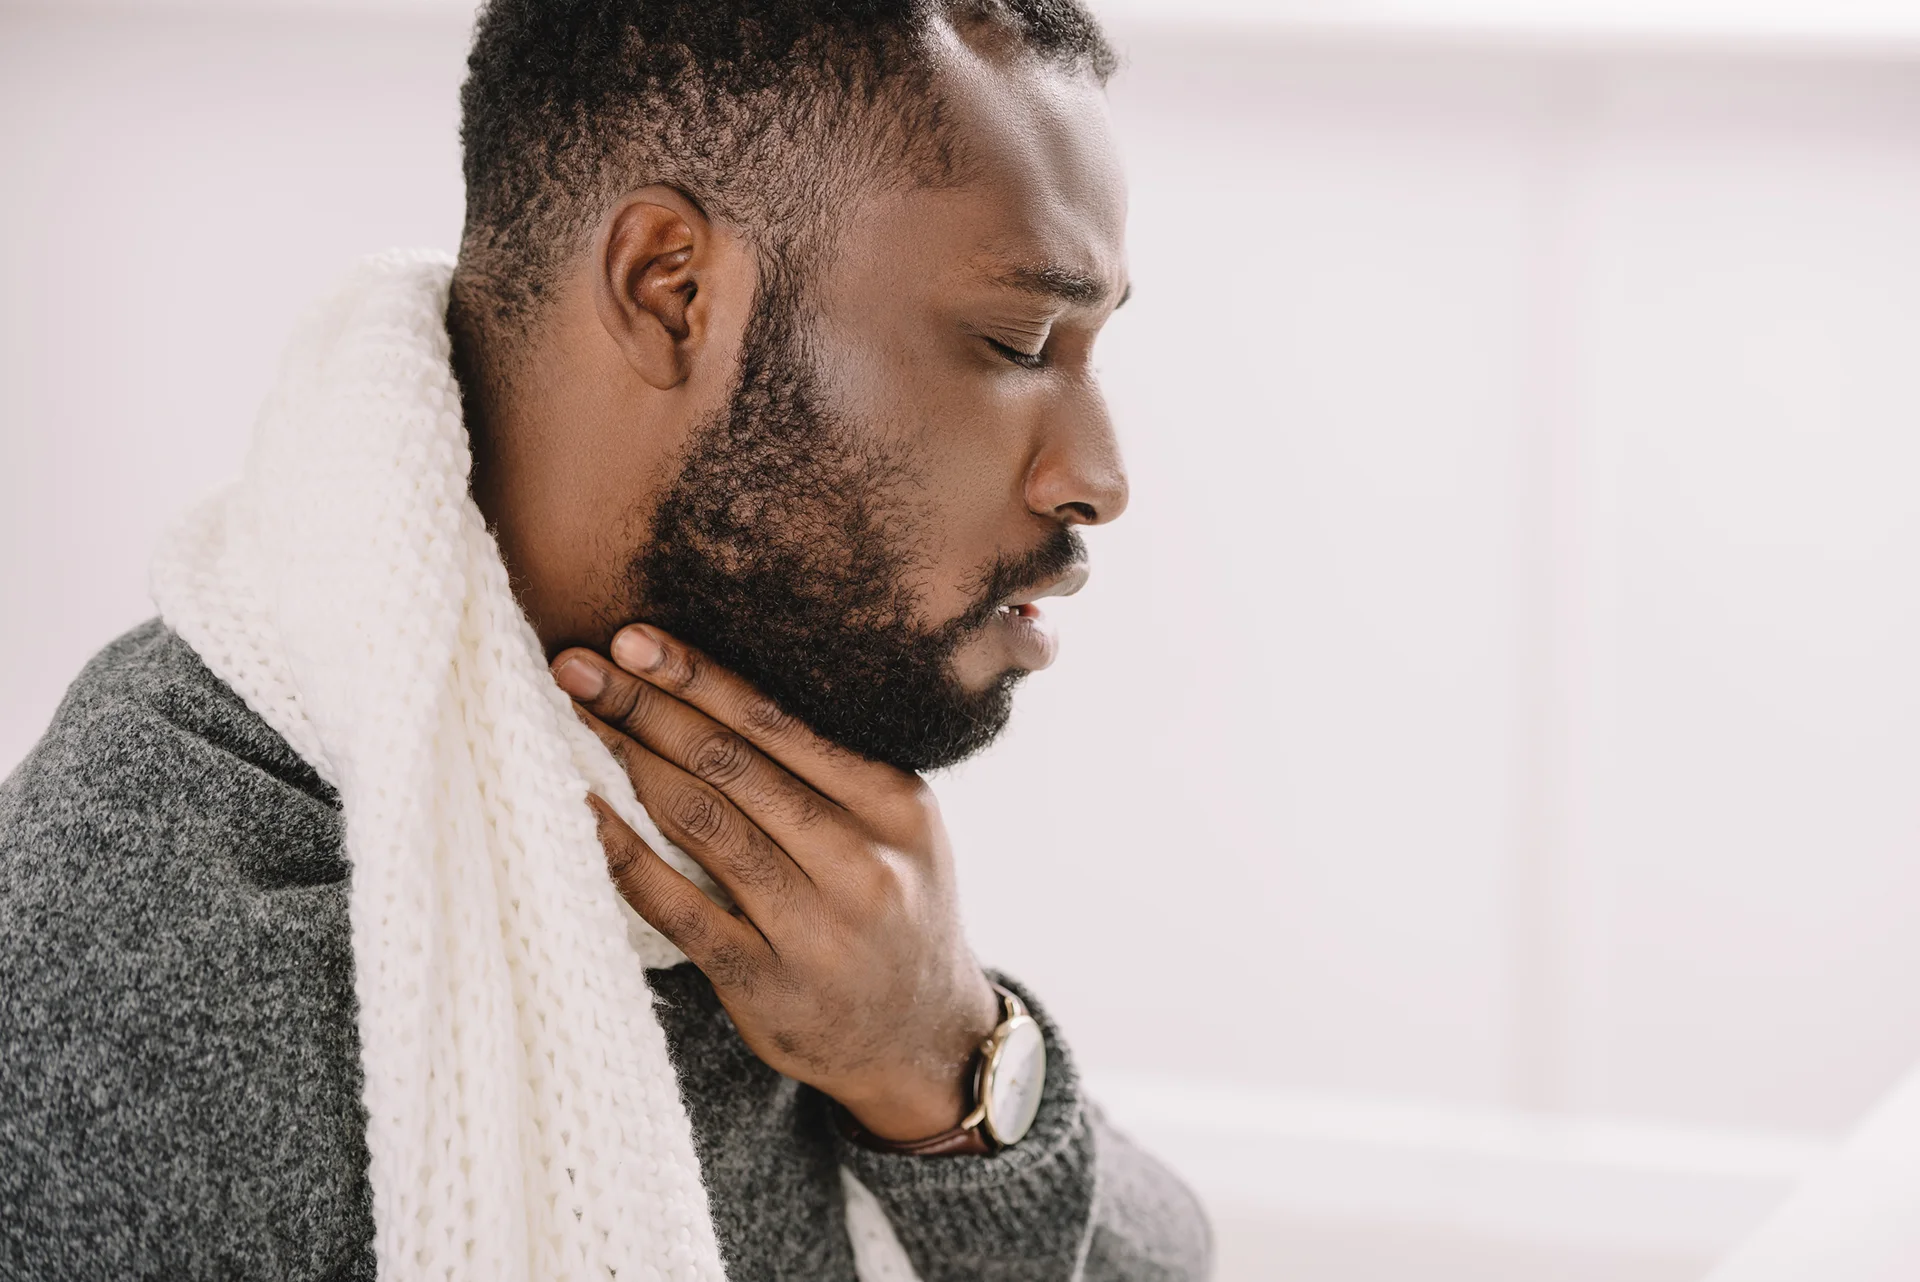 man suffering from sore throat